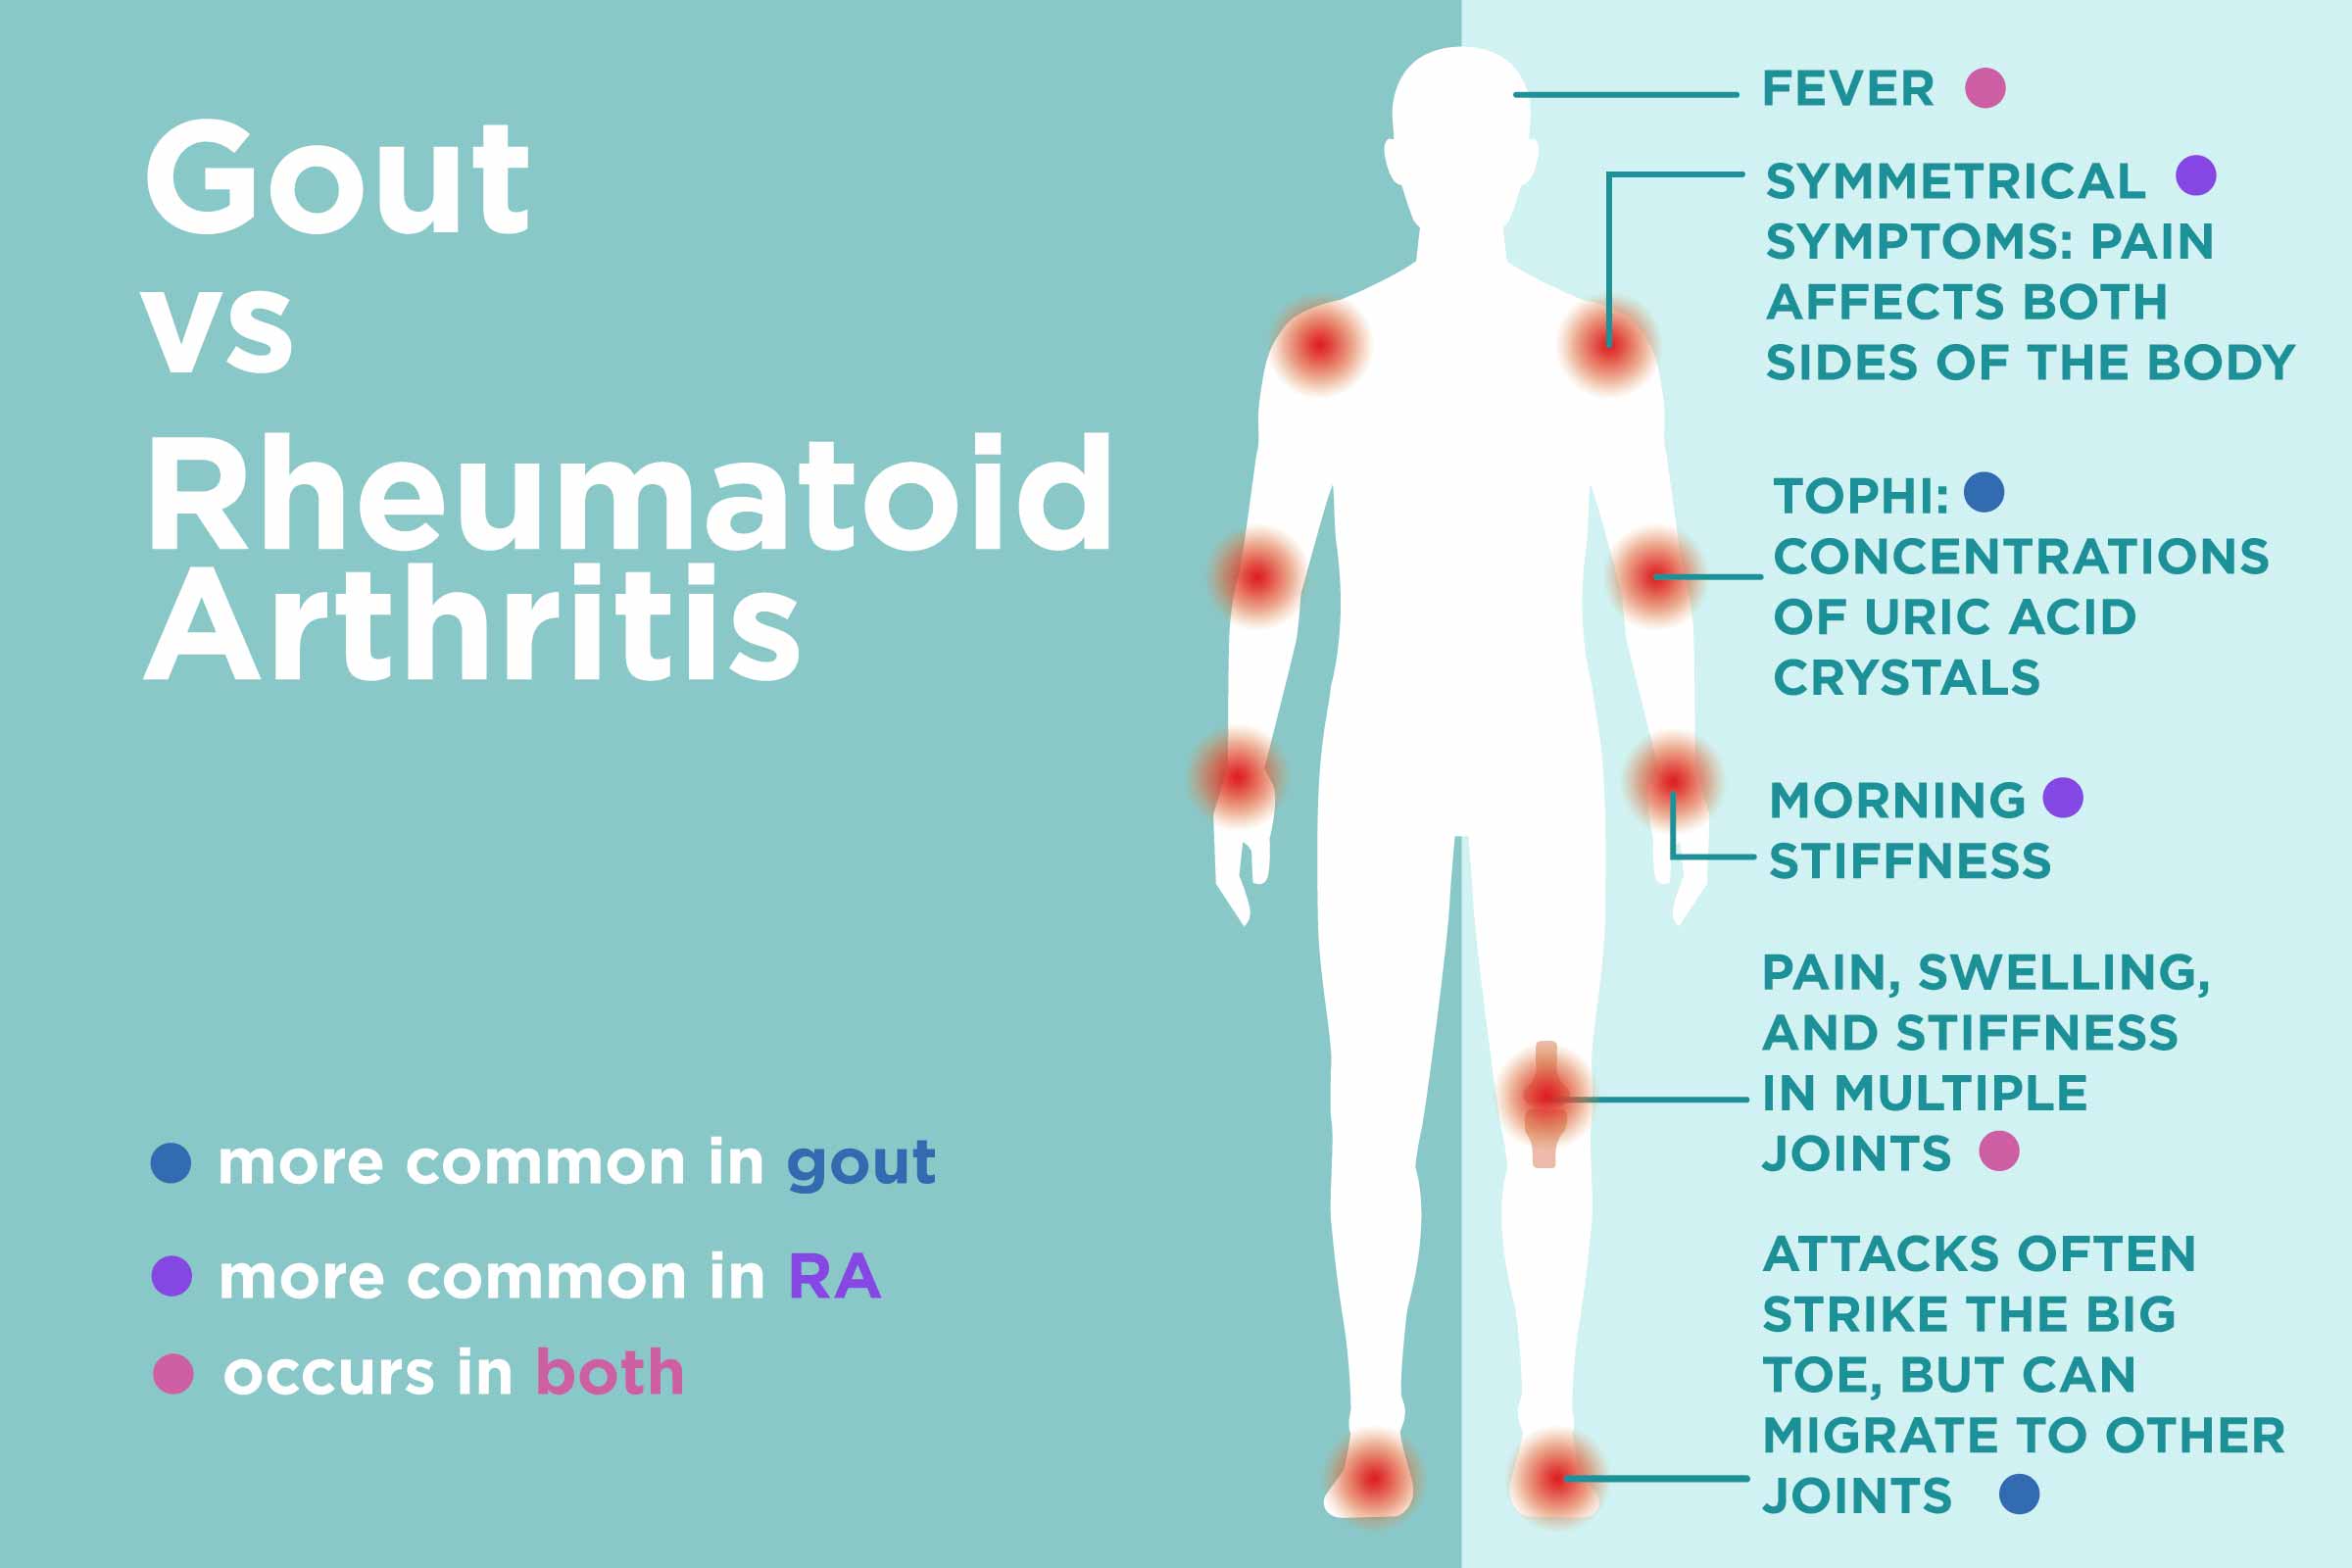 Gout vs. Rheumatoid Arthritis: Whats the Difference?